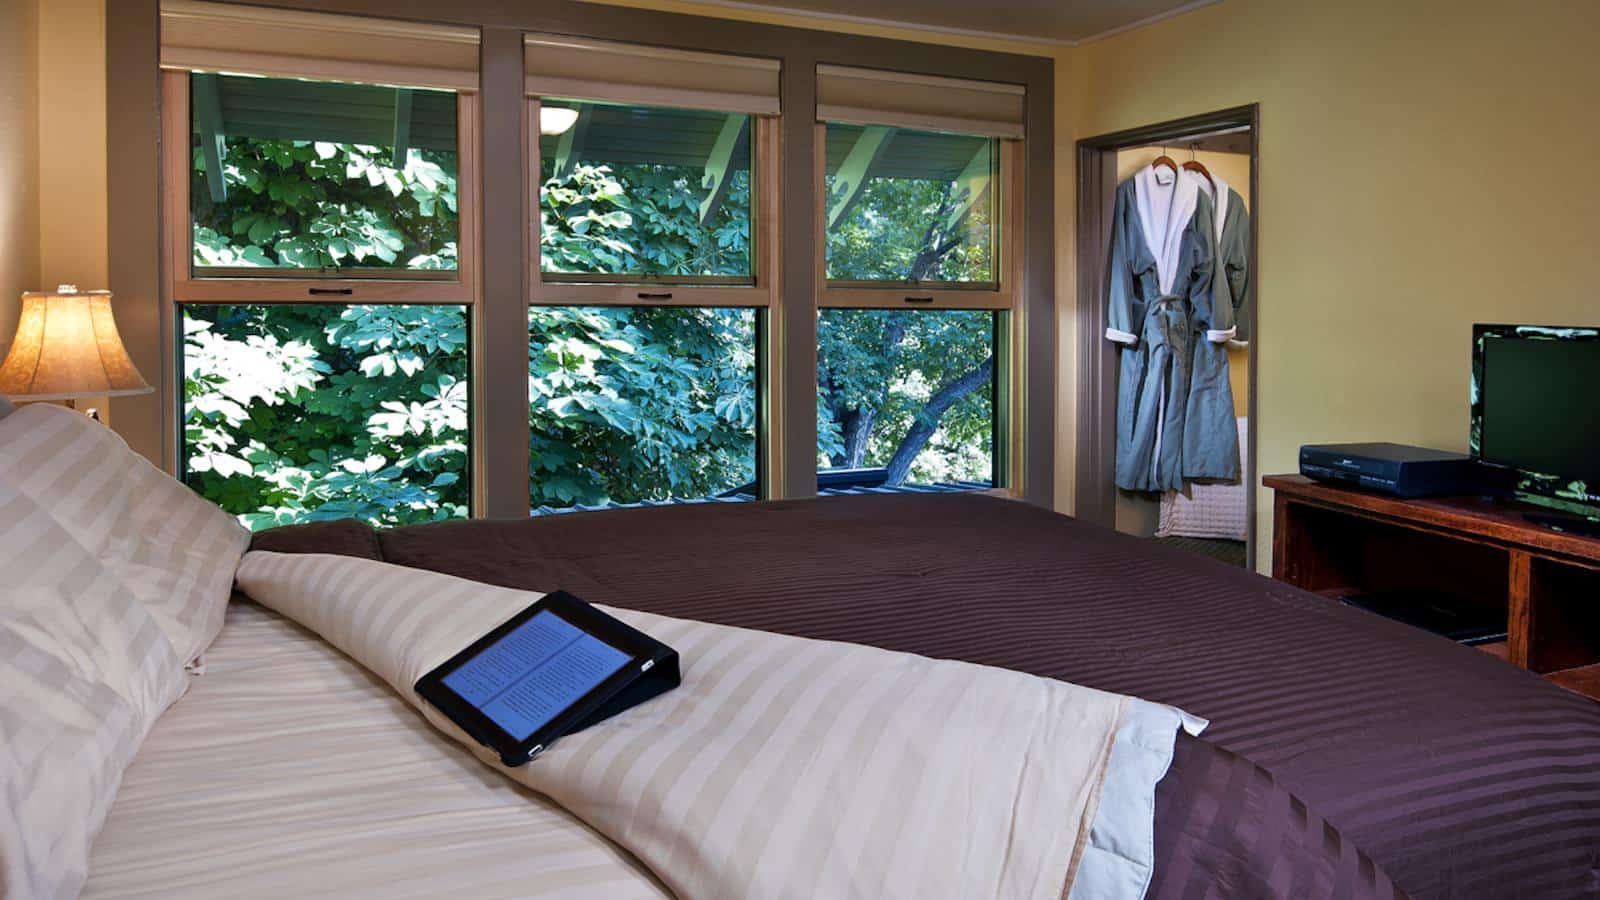 Bedroom with light green walls, multicolored bedding, and large windows with view of green trees